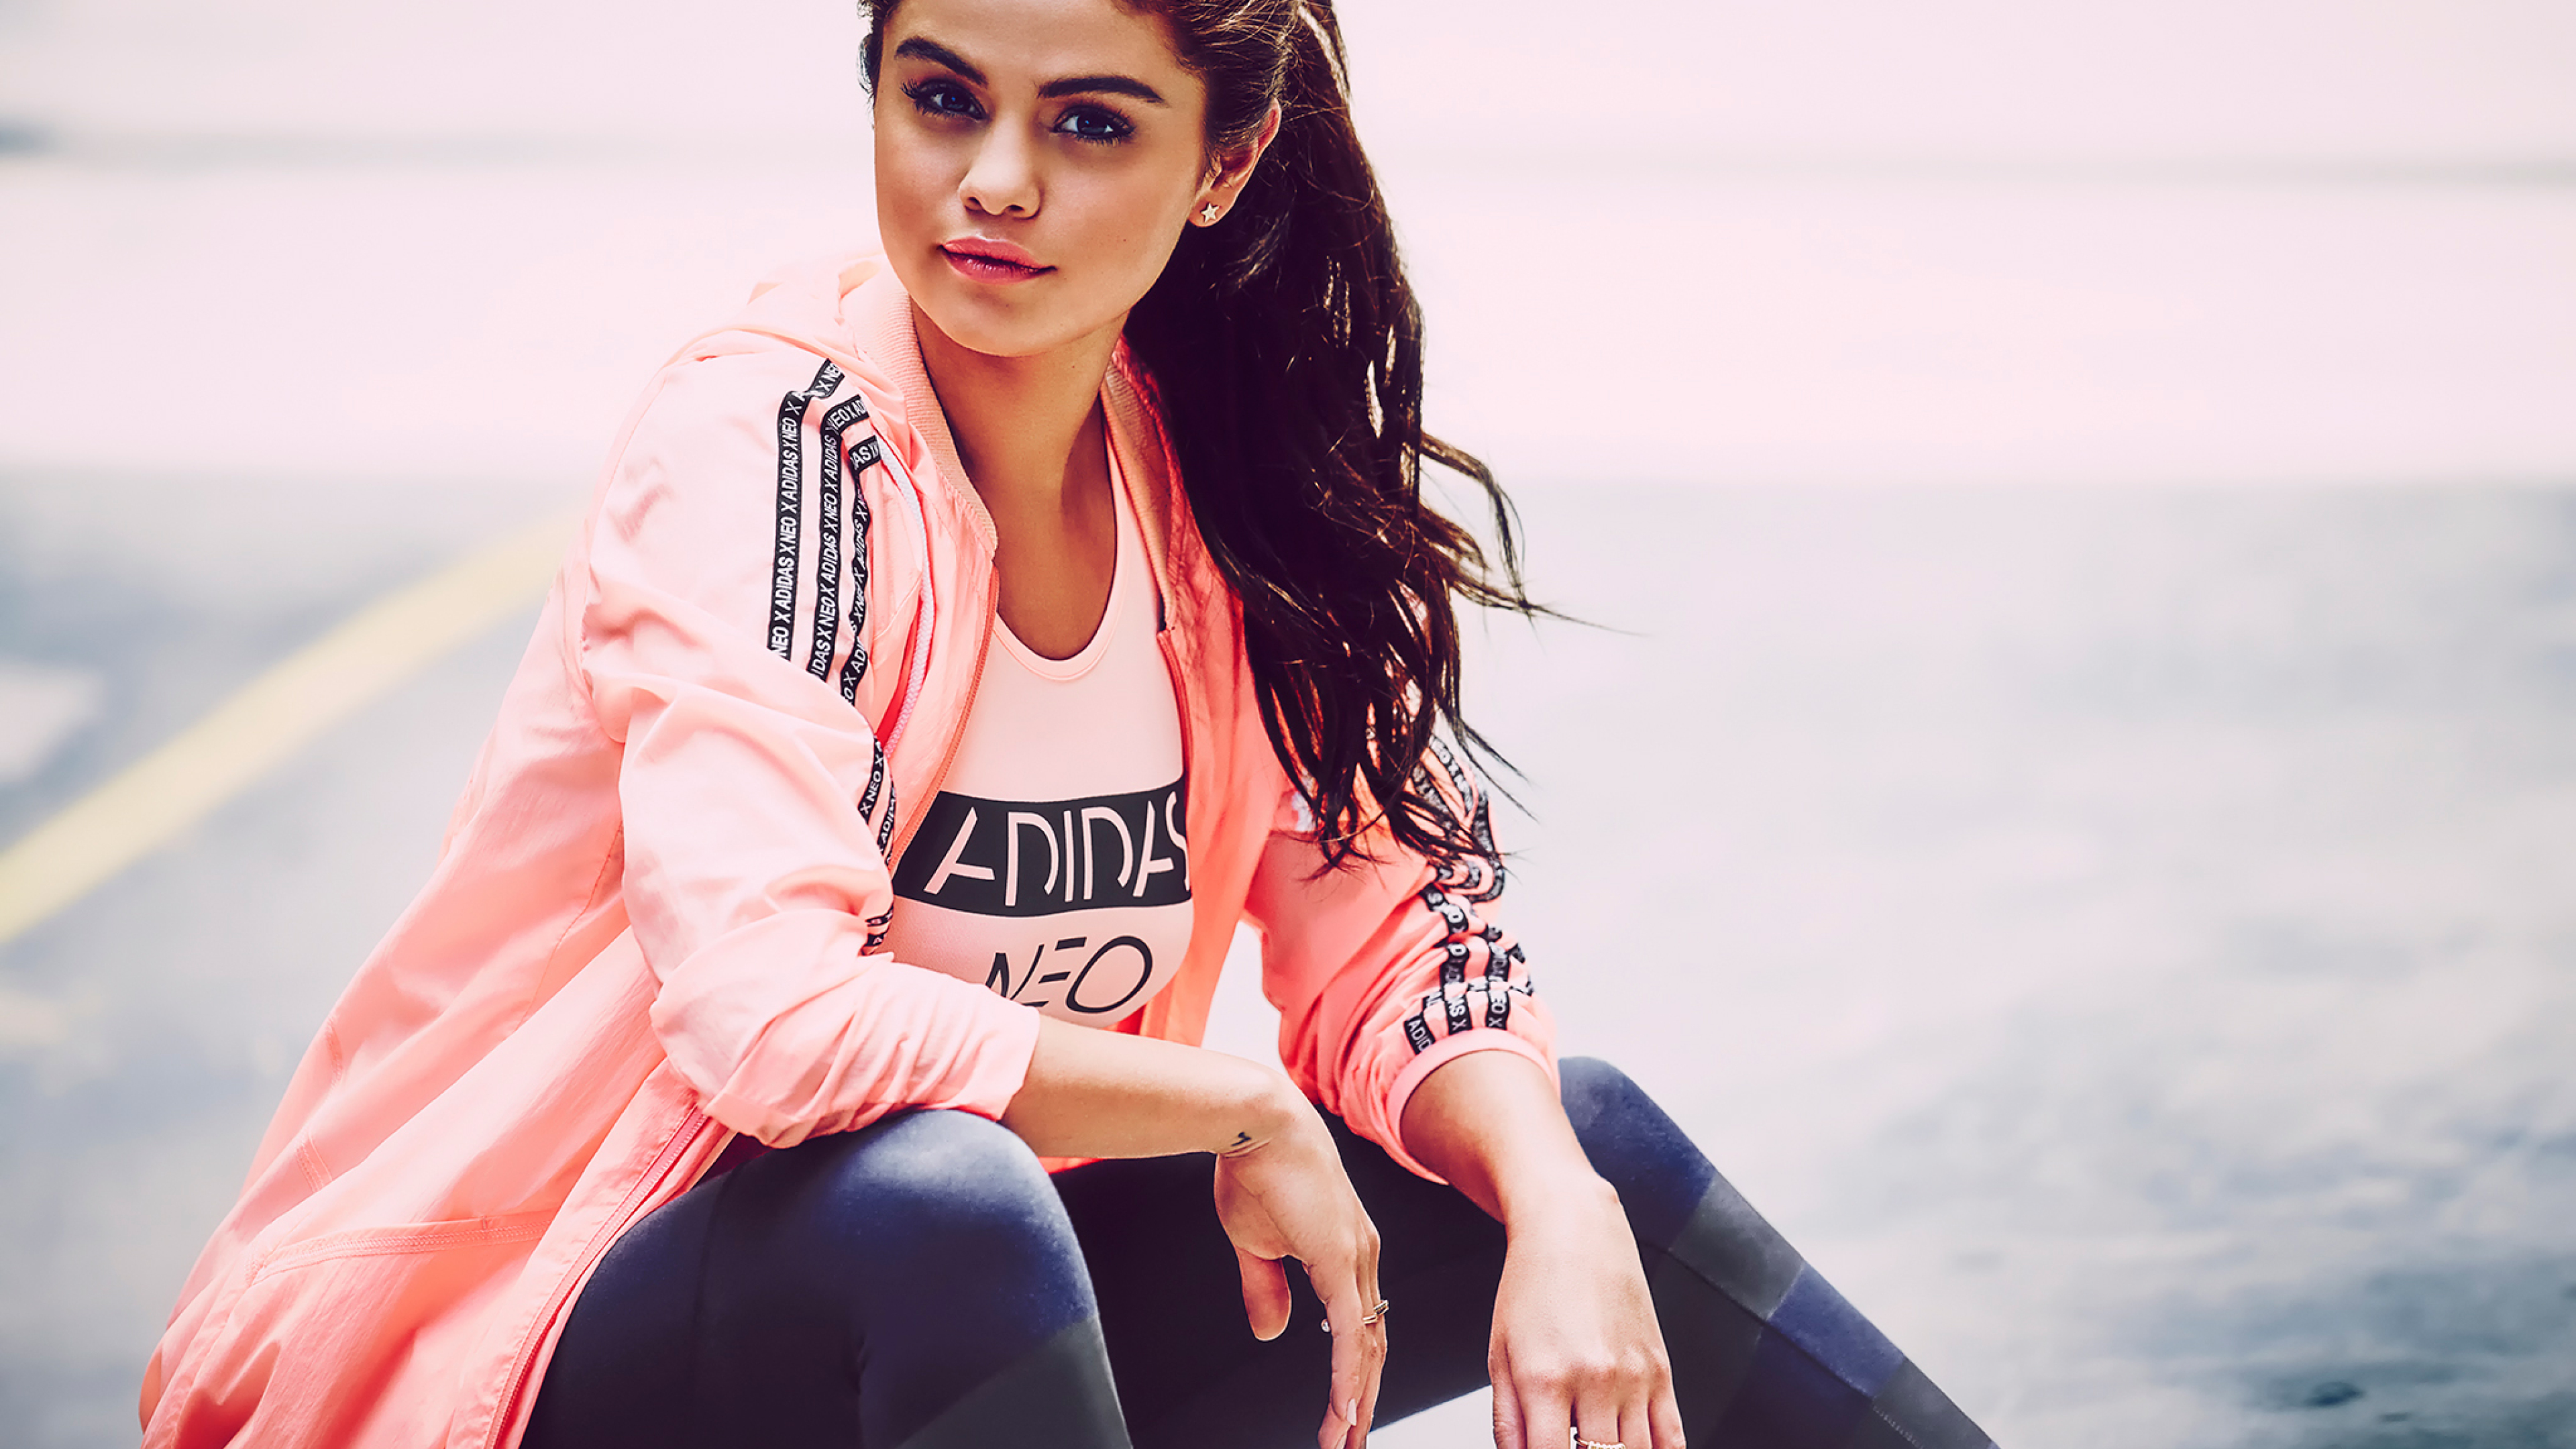 3840x2160 selena gomez, adidas neo, photoshoot 4K Wallpaper, HD Celebrities 4K Wallpapers, Images, Photos and Background Wallpapers Den